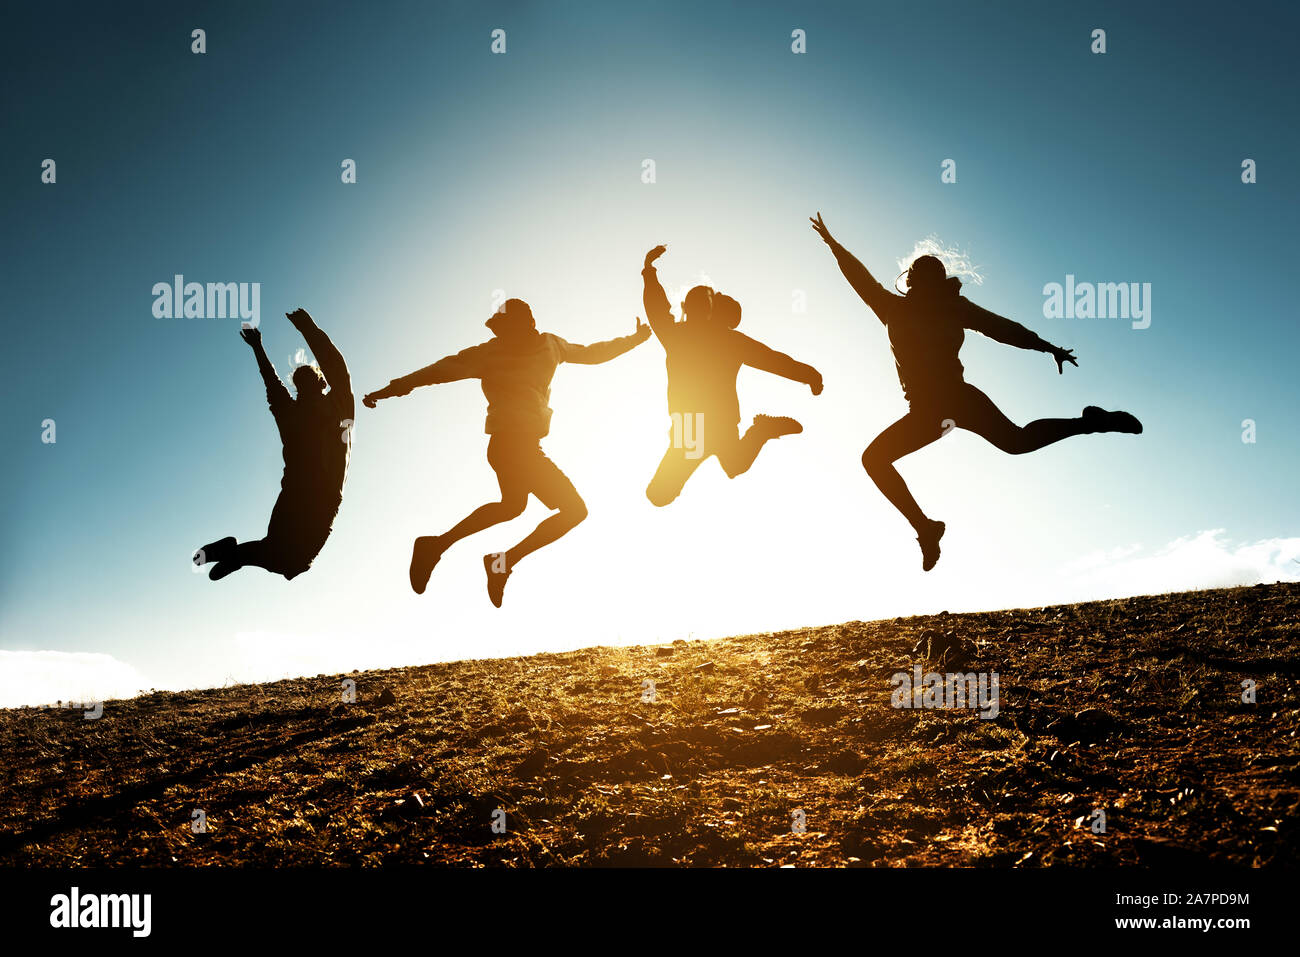 Four silhouettes of friends are jumping together against blue sky and sun Stock Photo